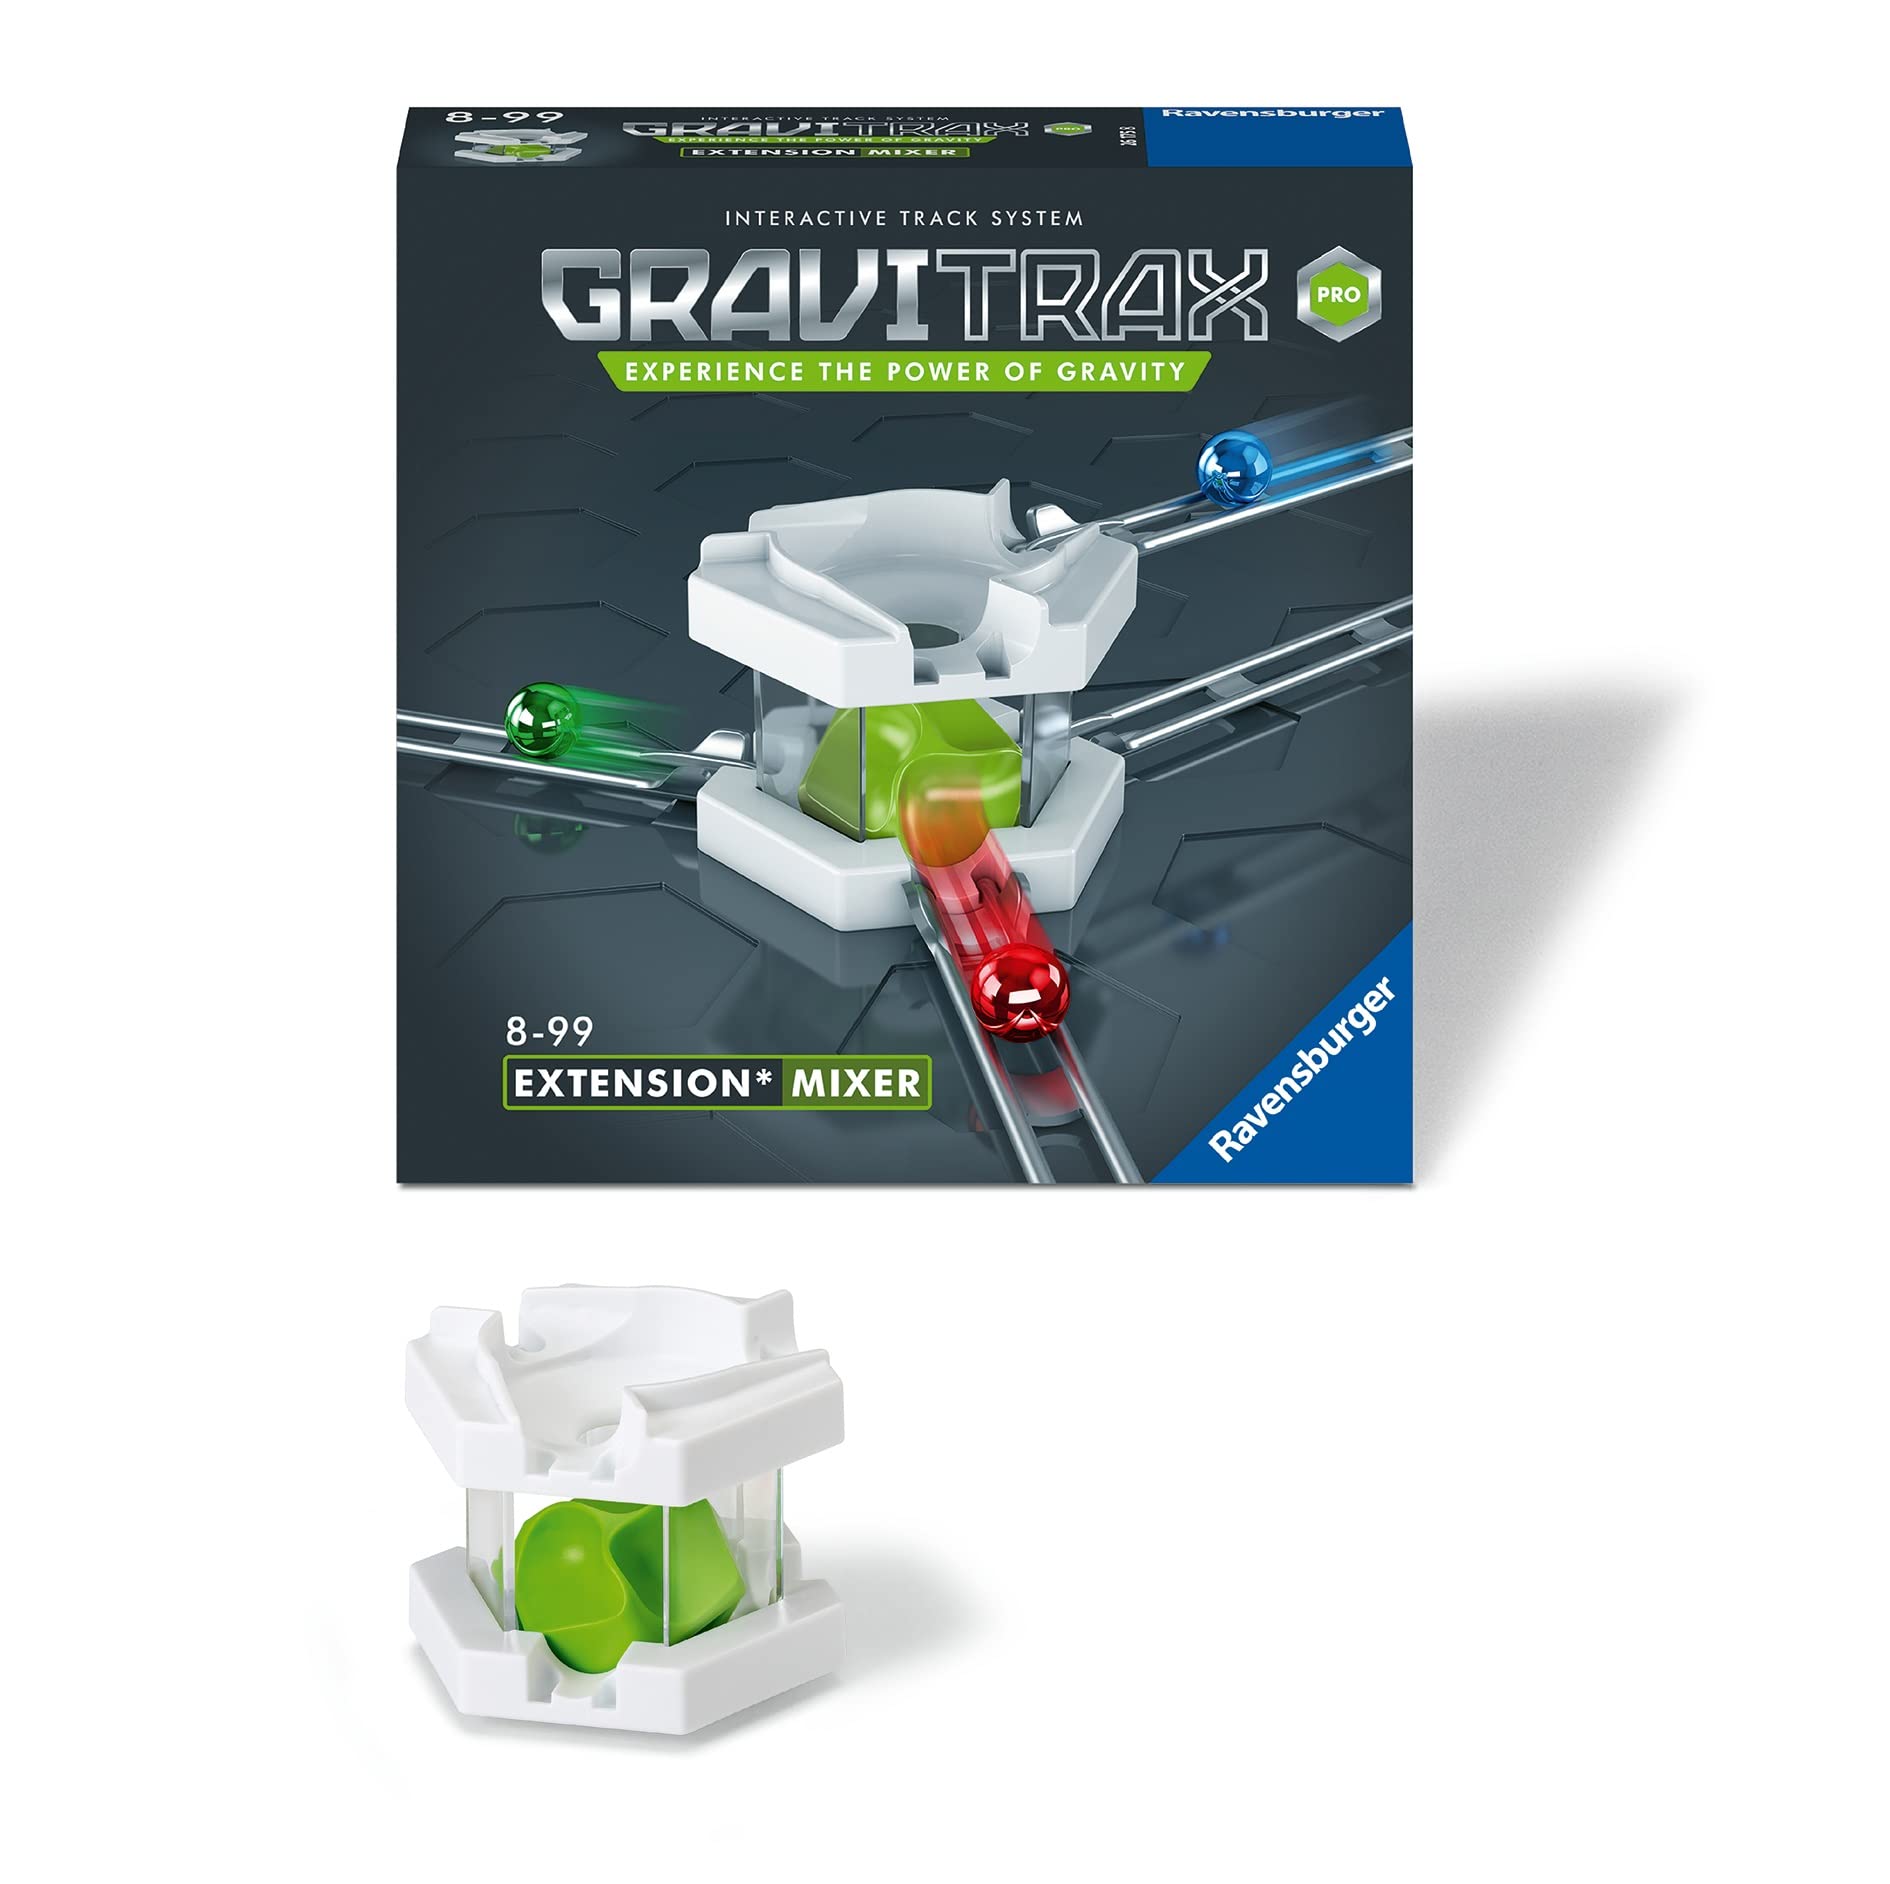 Ravensburger GraviTrax PRO Mixer Accessory - Marble Run and STEM Toy for Boys and Girls Age 8 and Up - Accessory for 2019 Toy of The Year Finalist GraviTrax, Black